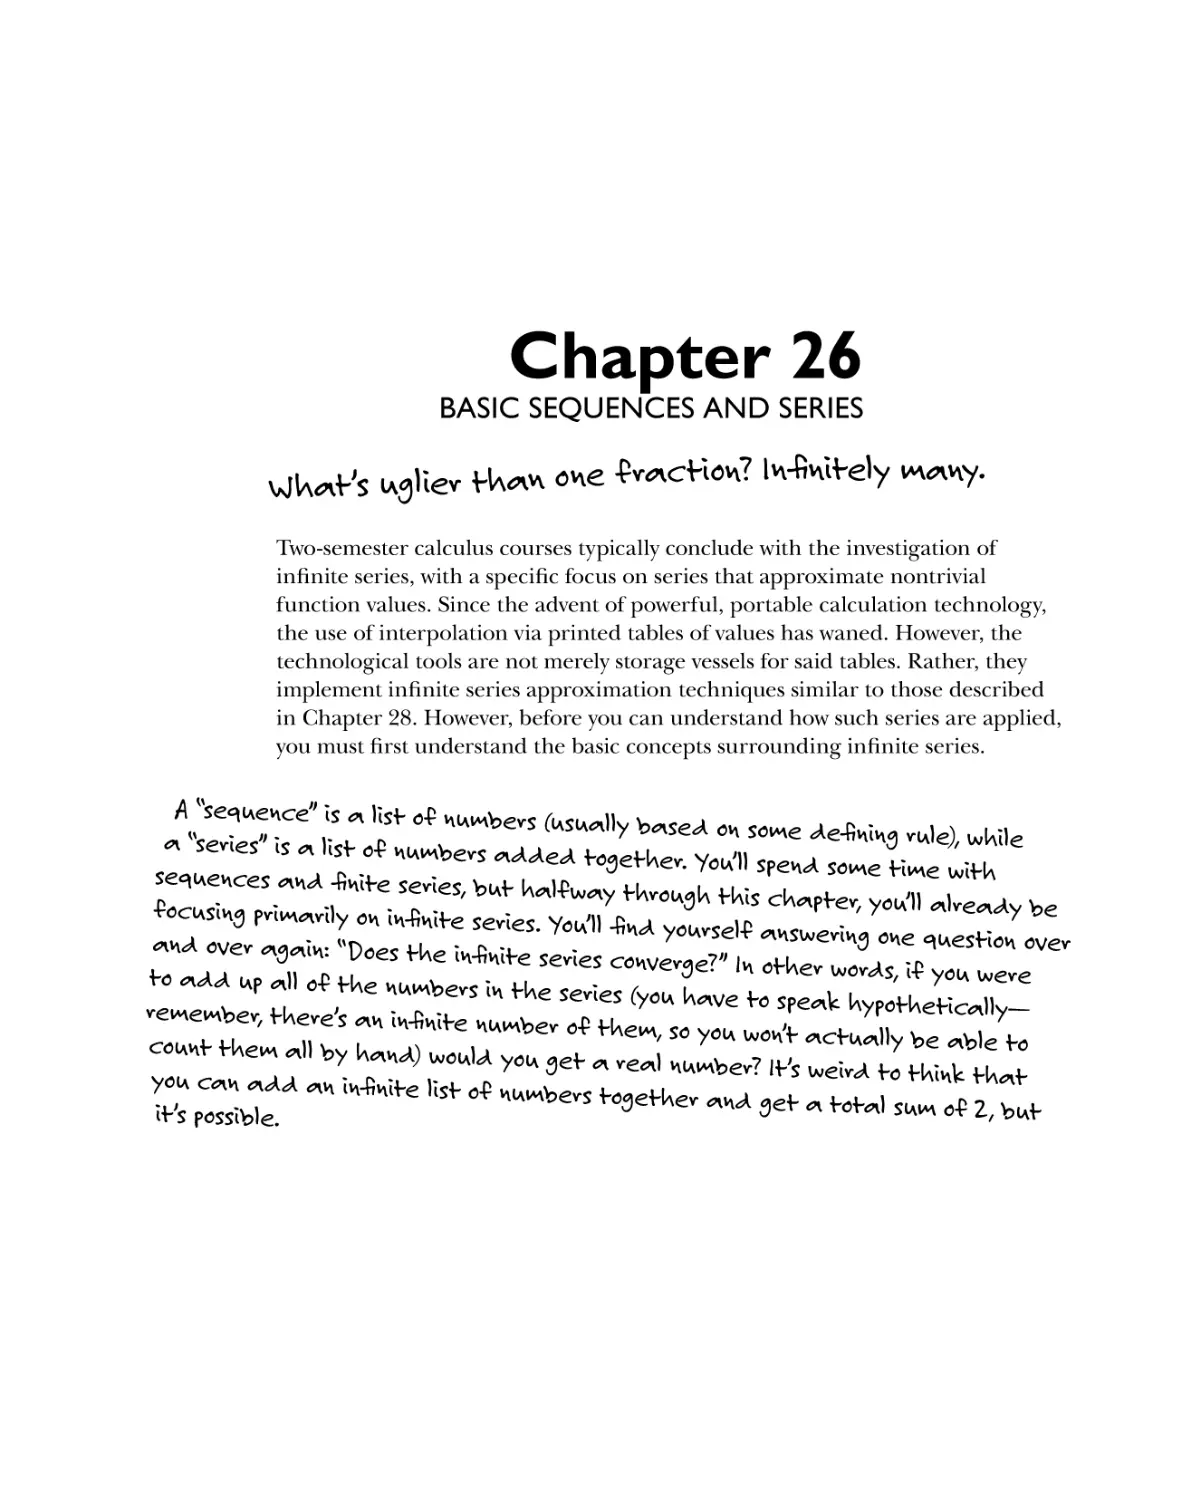 Chapter 26: Basic Sequences and Series 495